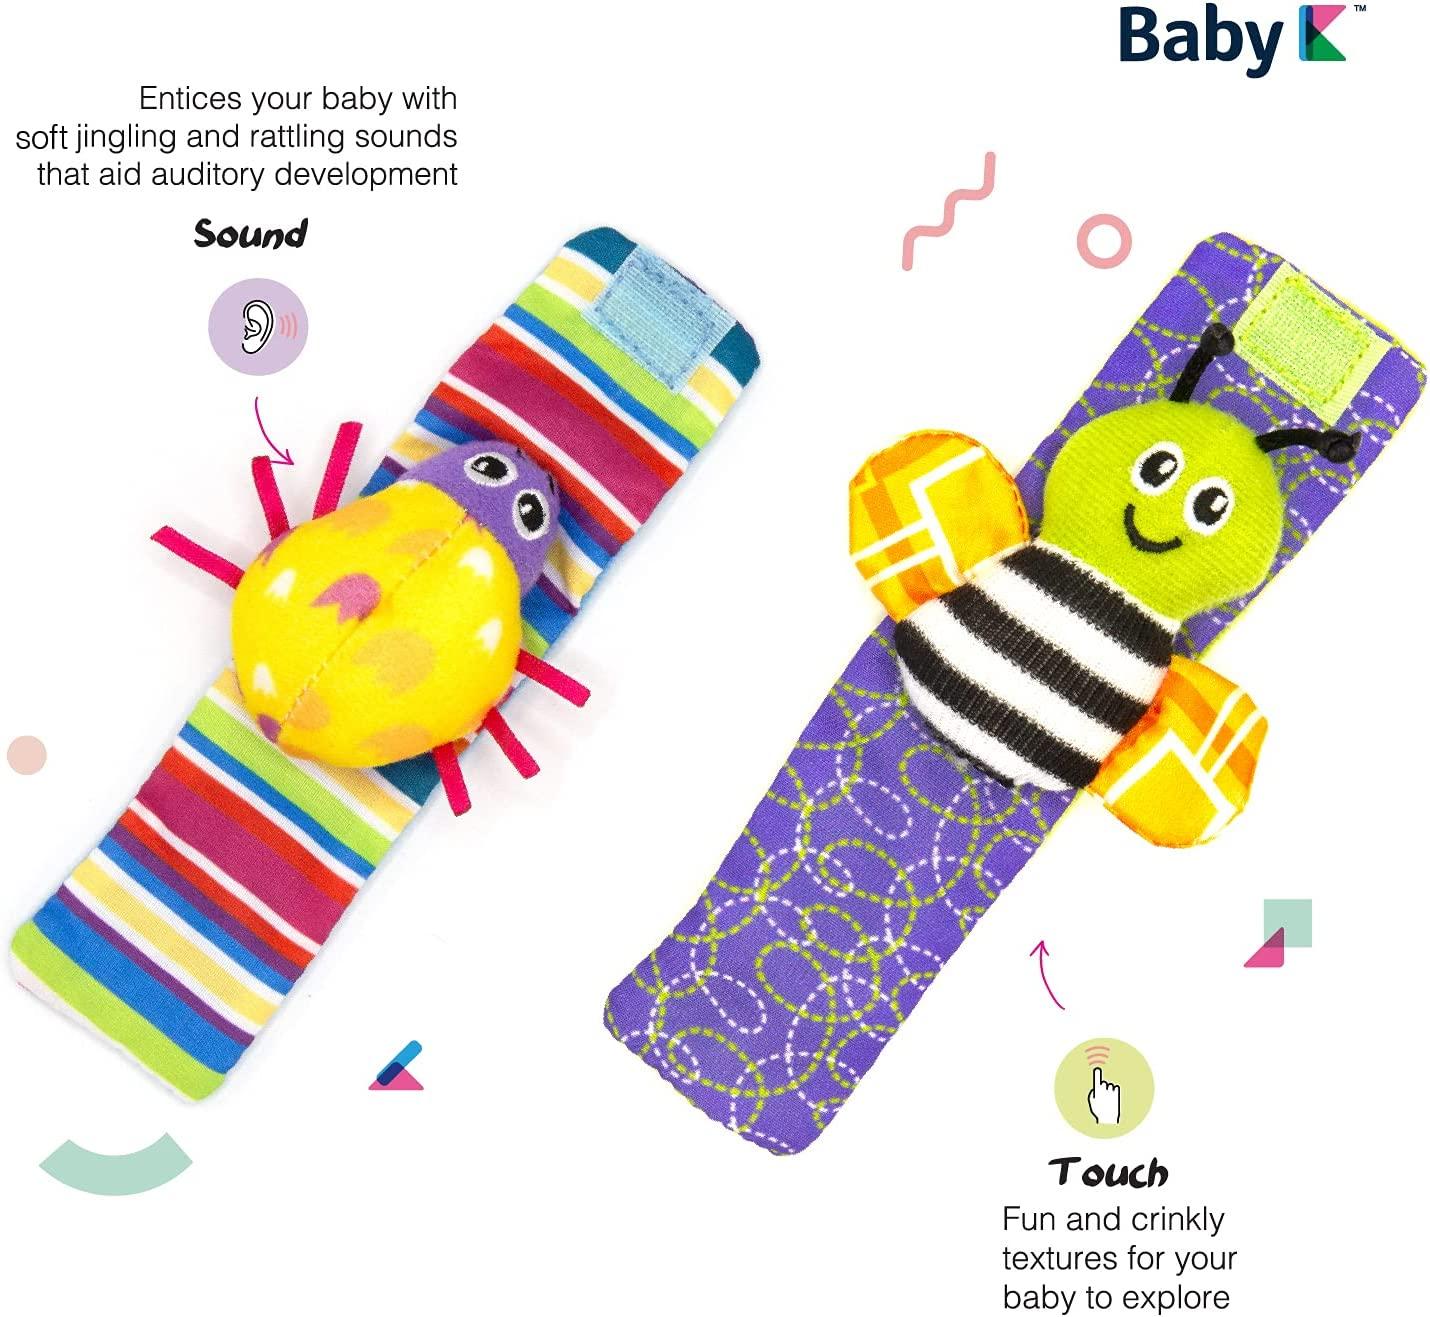 Buy the Gardenbug Wrist Rattle & Foot Finder Set from Babies-R-Us